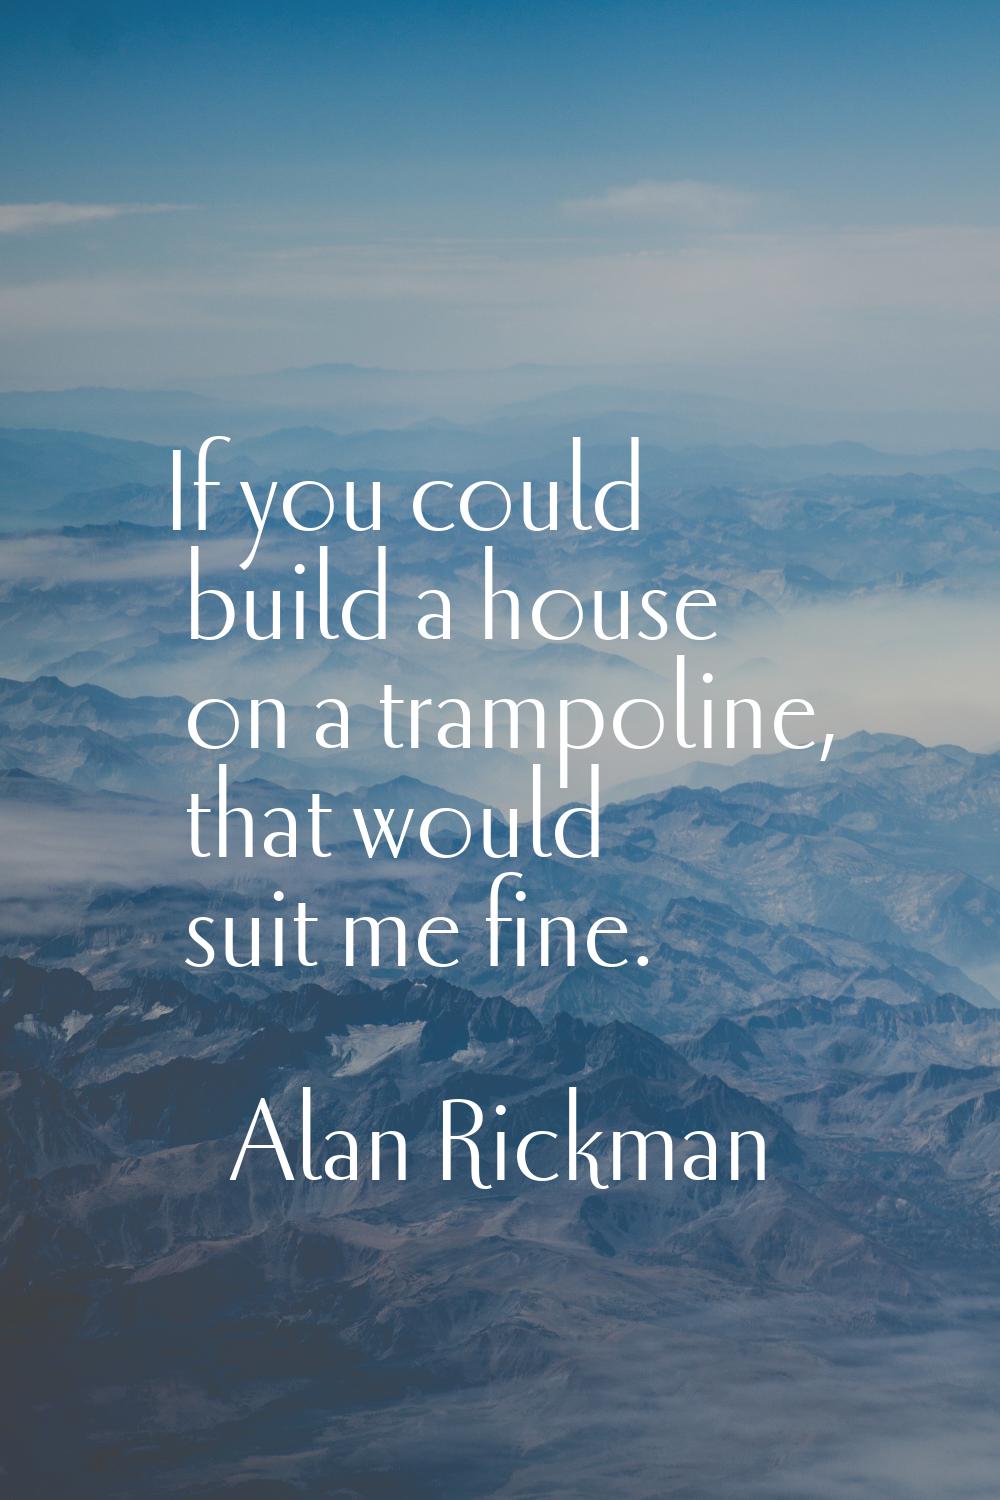 If you could build a house on a trampoline, that would suit me fine.